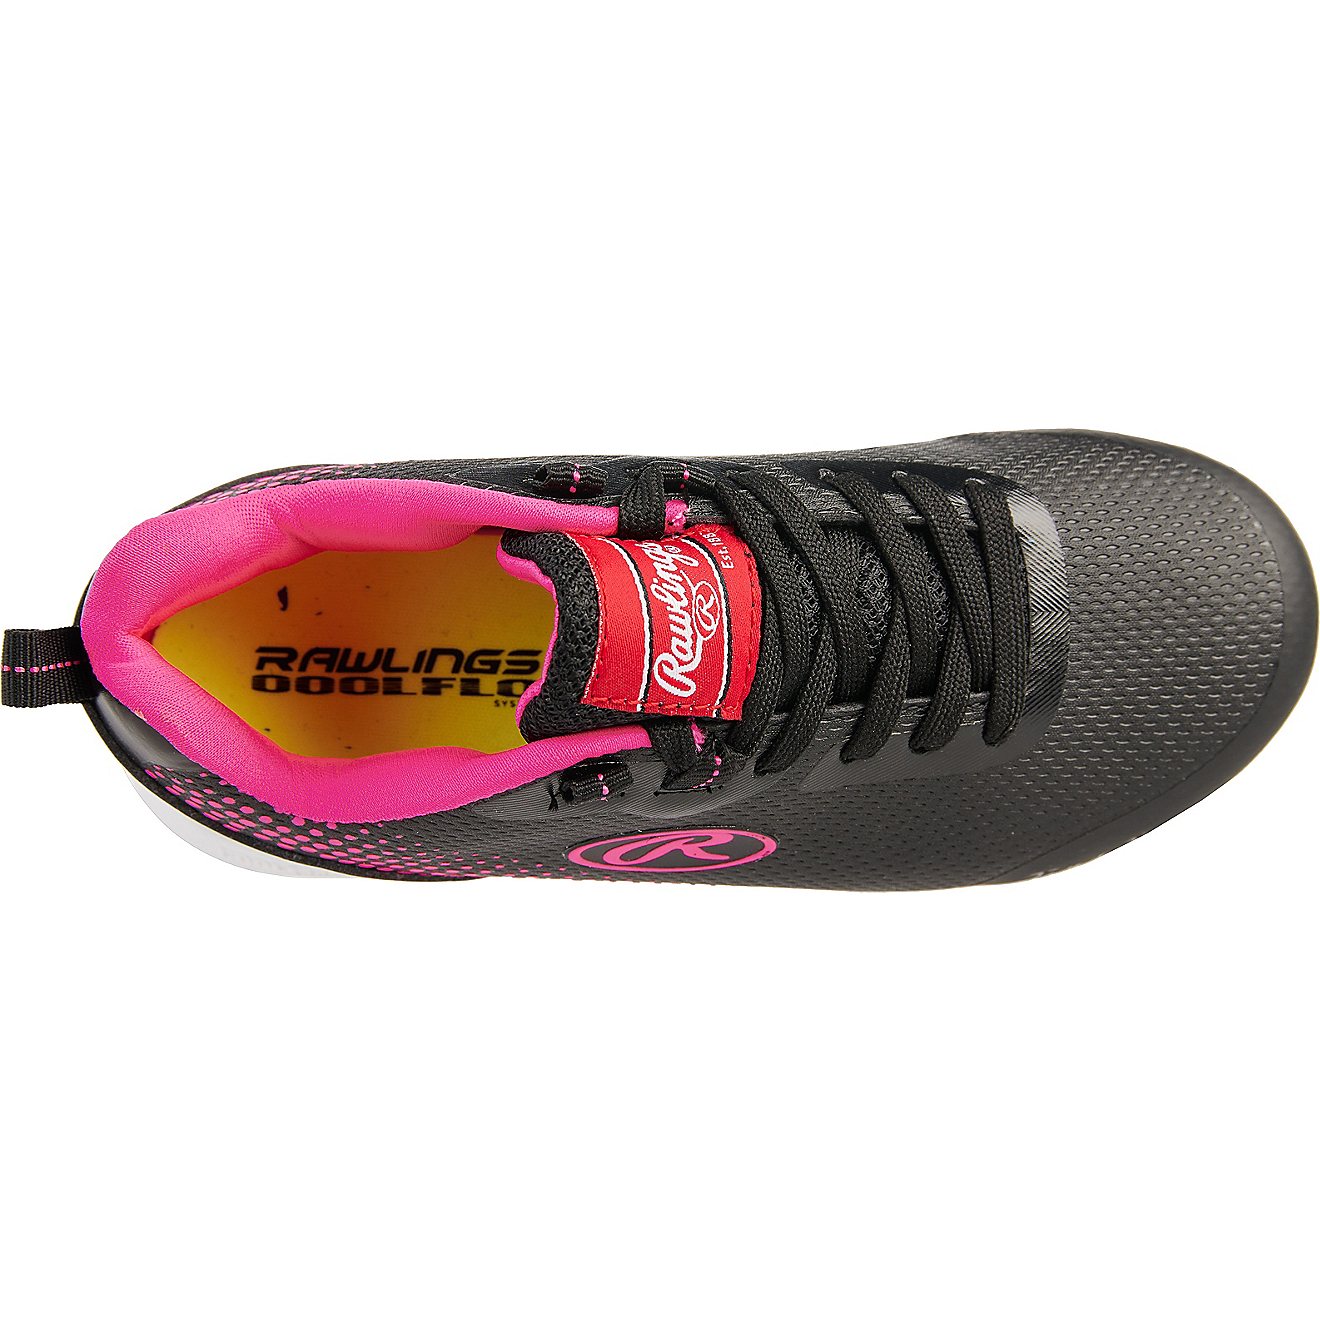 Rawlings Girls’ Division Low Softball Cleats                                                                                   - view number 3